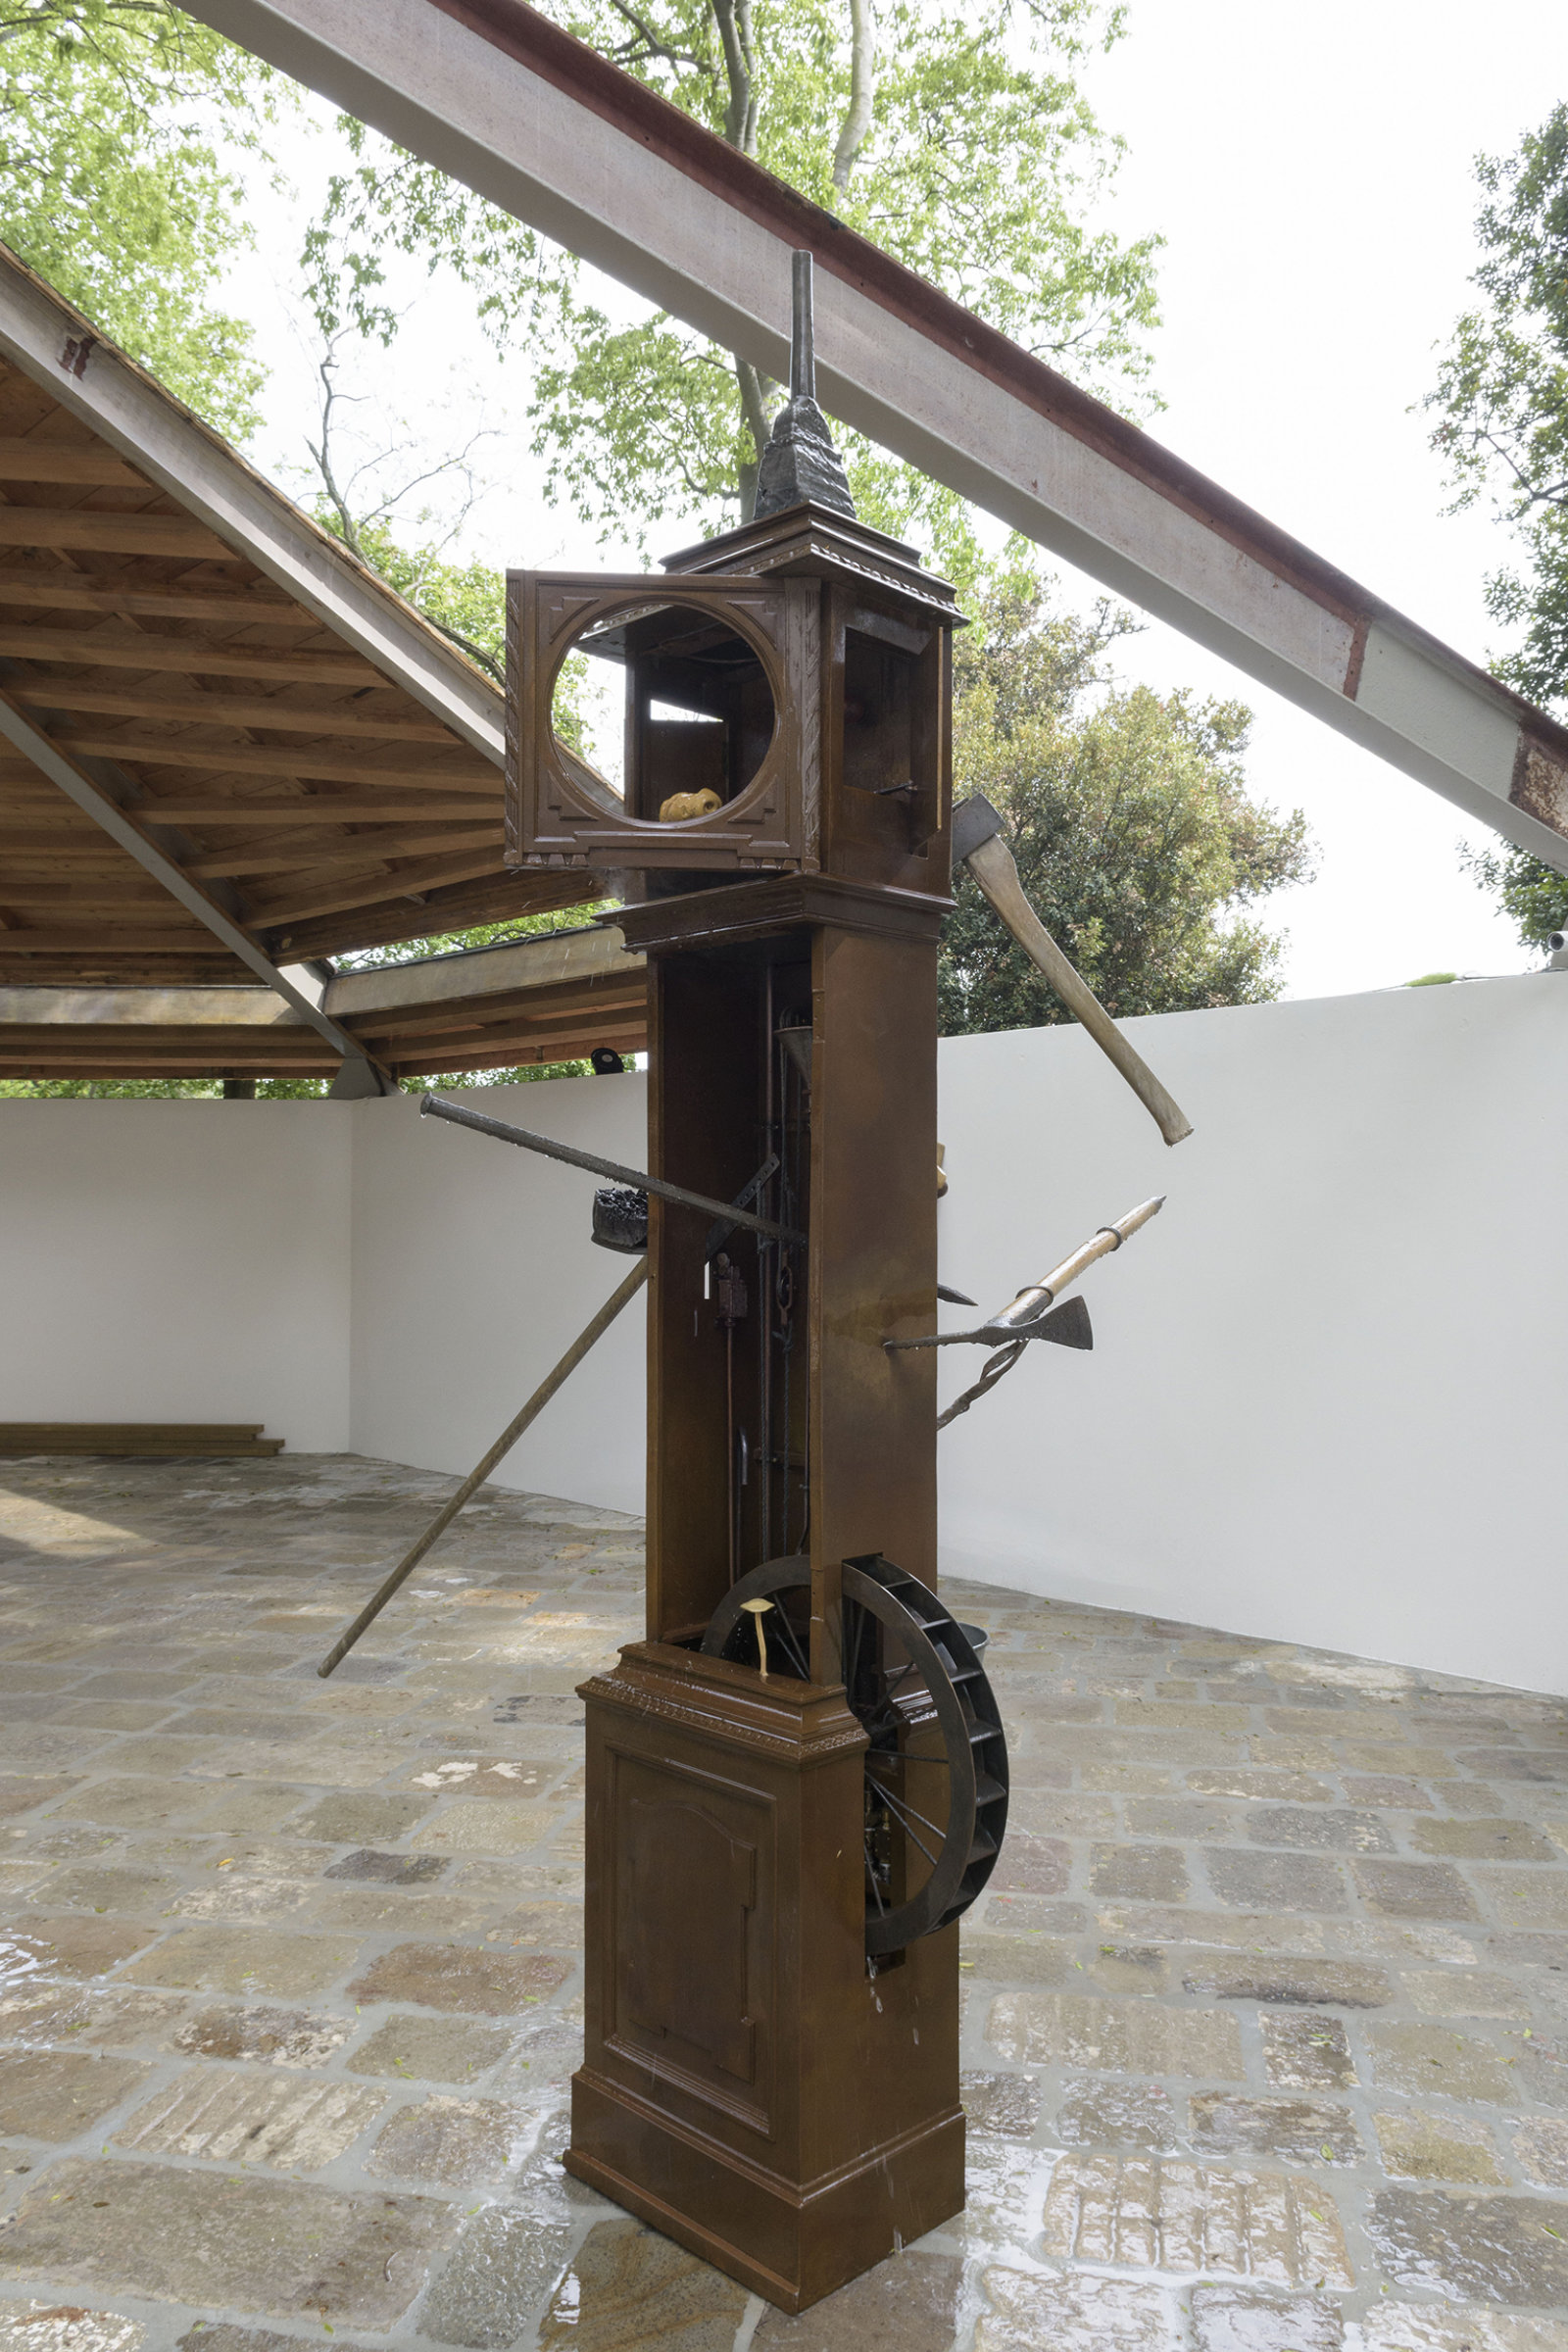 Geoffrey Farmer, Wounded Man, 2017, assembled cast bronze objects, waterworks, 118 x 20 x 20 in. (300 x 50 x 50 cm). Installation view, A way out of the mirror, Canada Pavilion, 57th Venice Biennale, Venice, Italy